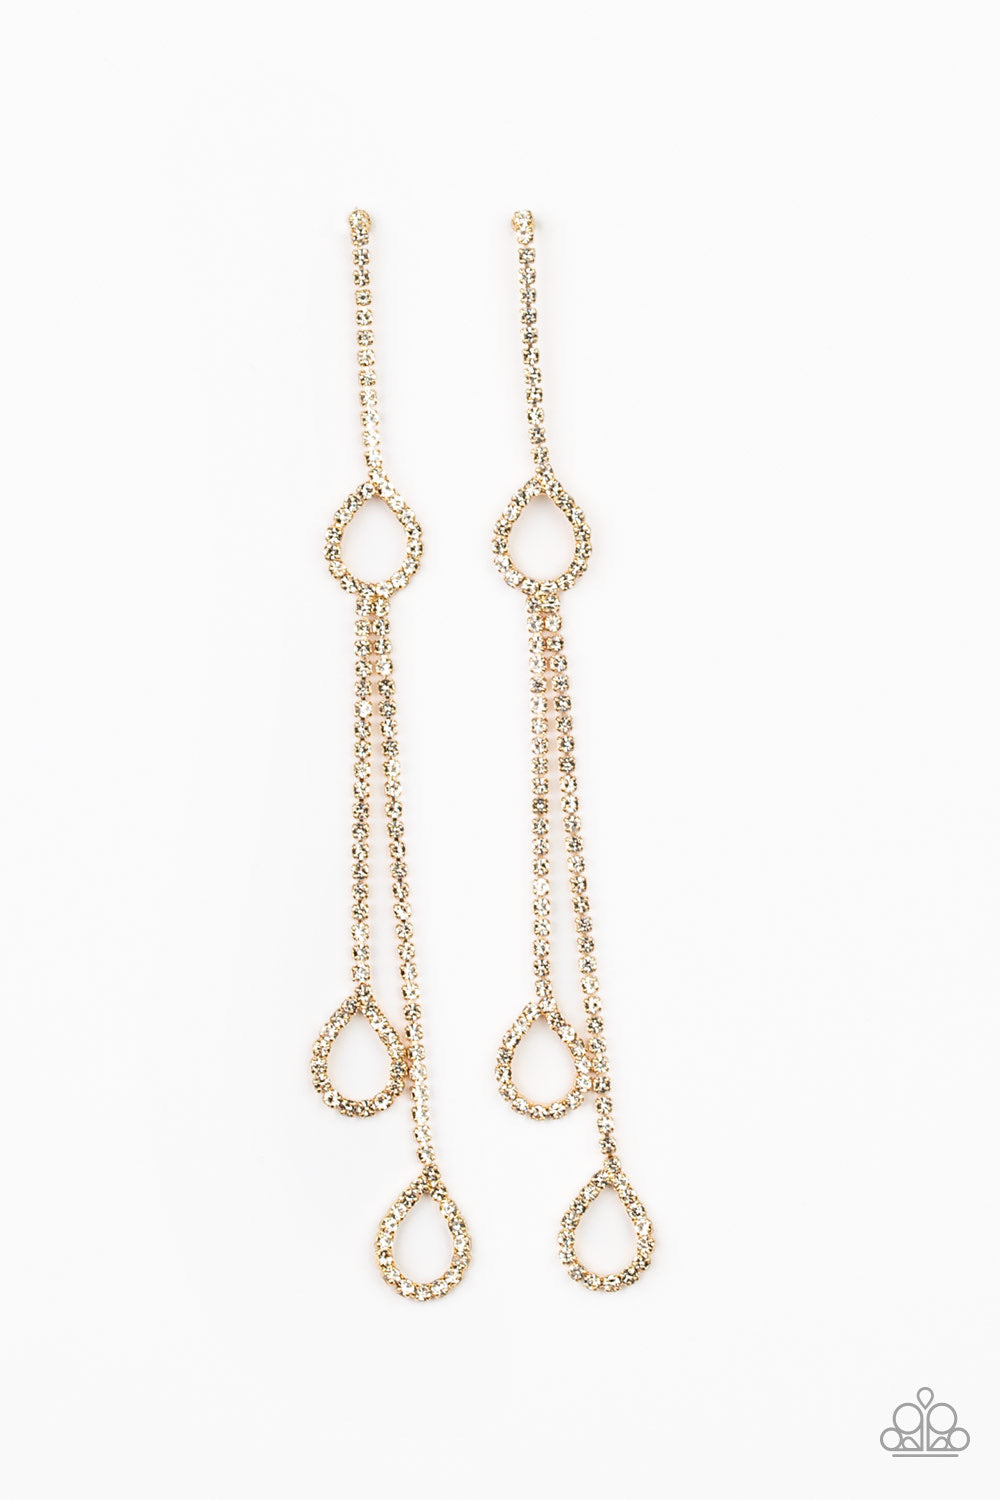 Chance of REIGN Gold-Earrings